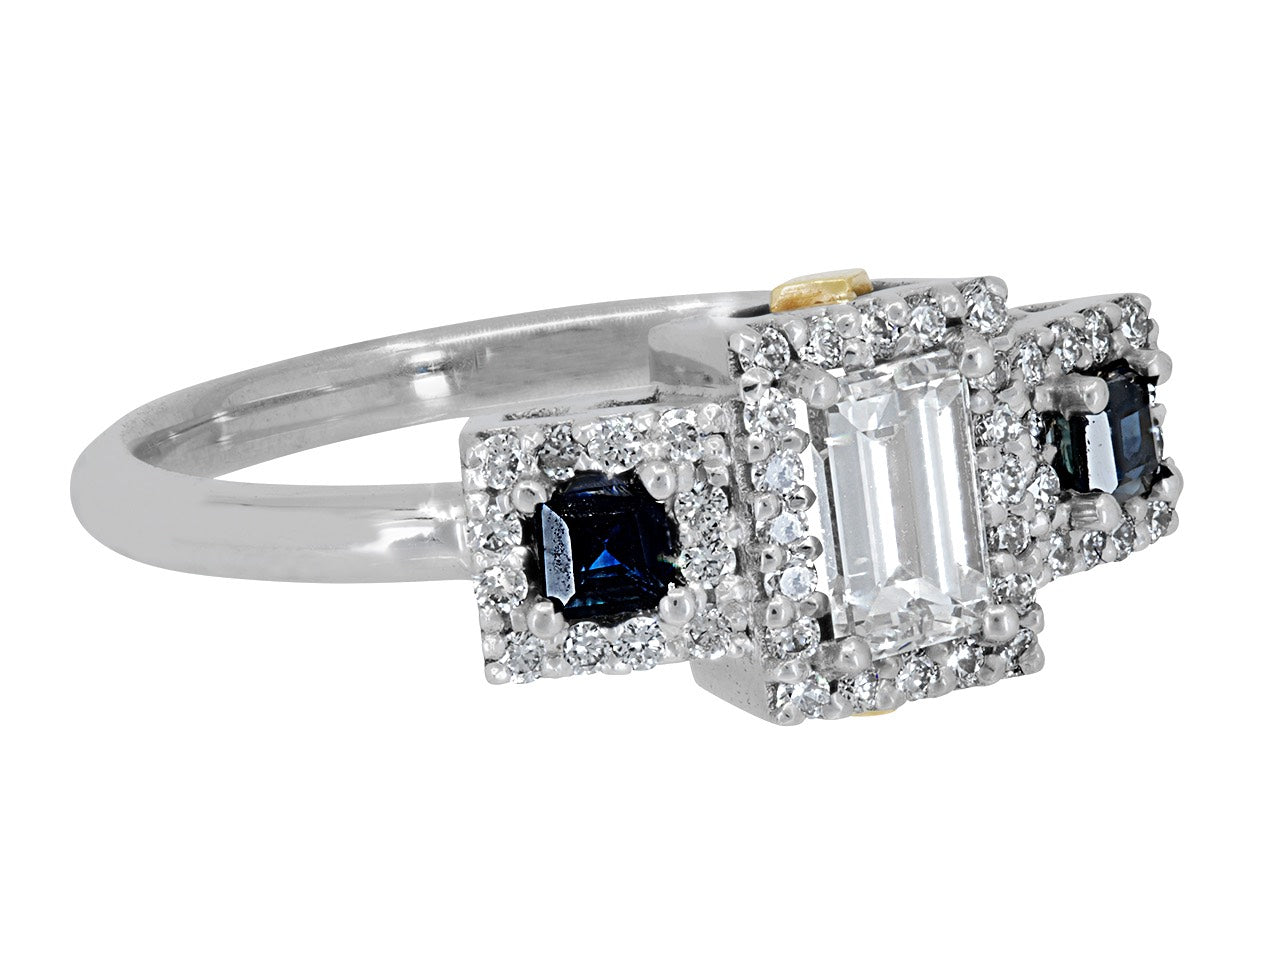 Step-cut Diamond and Sapphire Ring in 18K, designed by Rhonda Faber Green